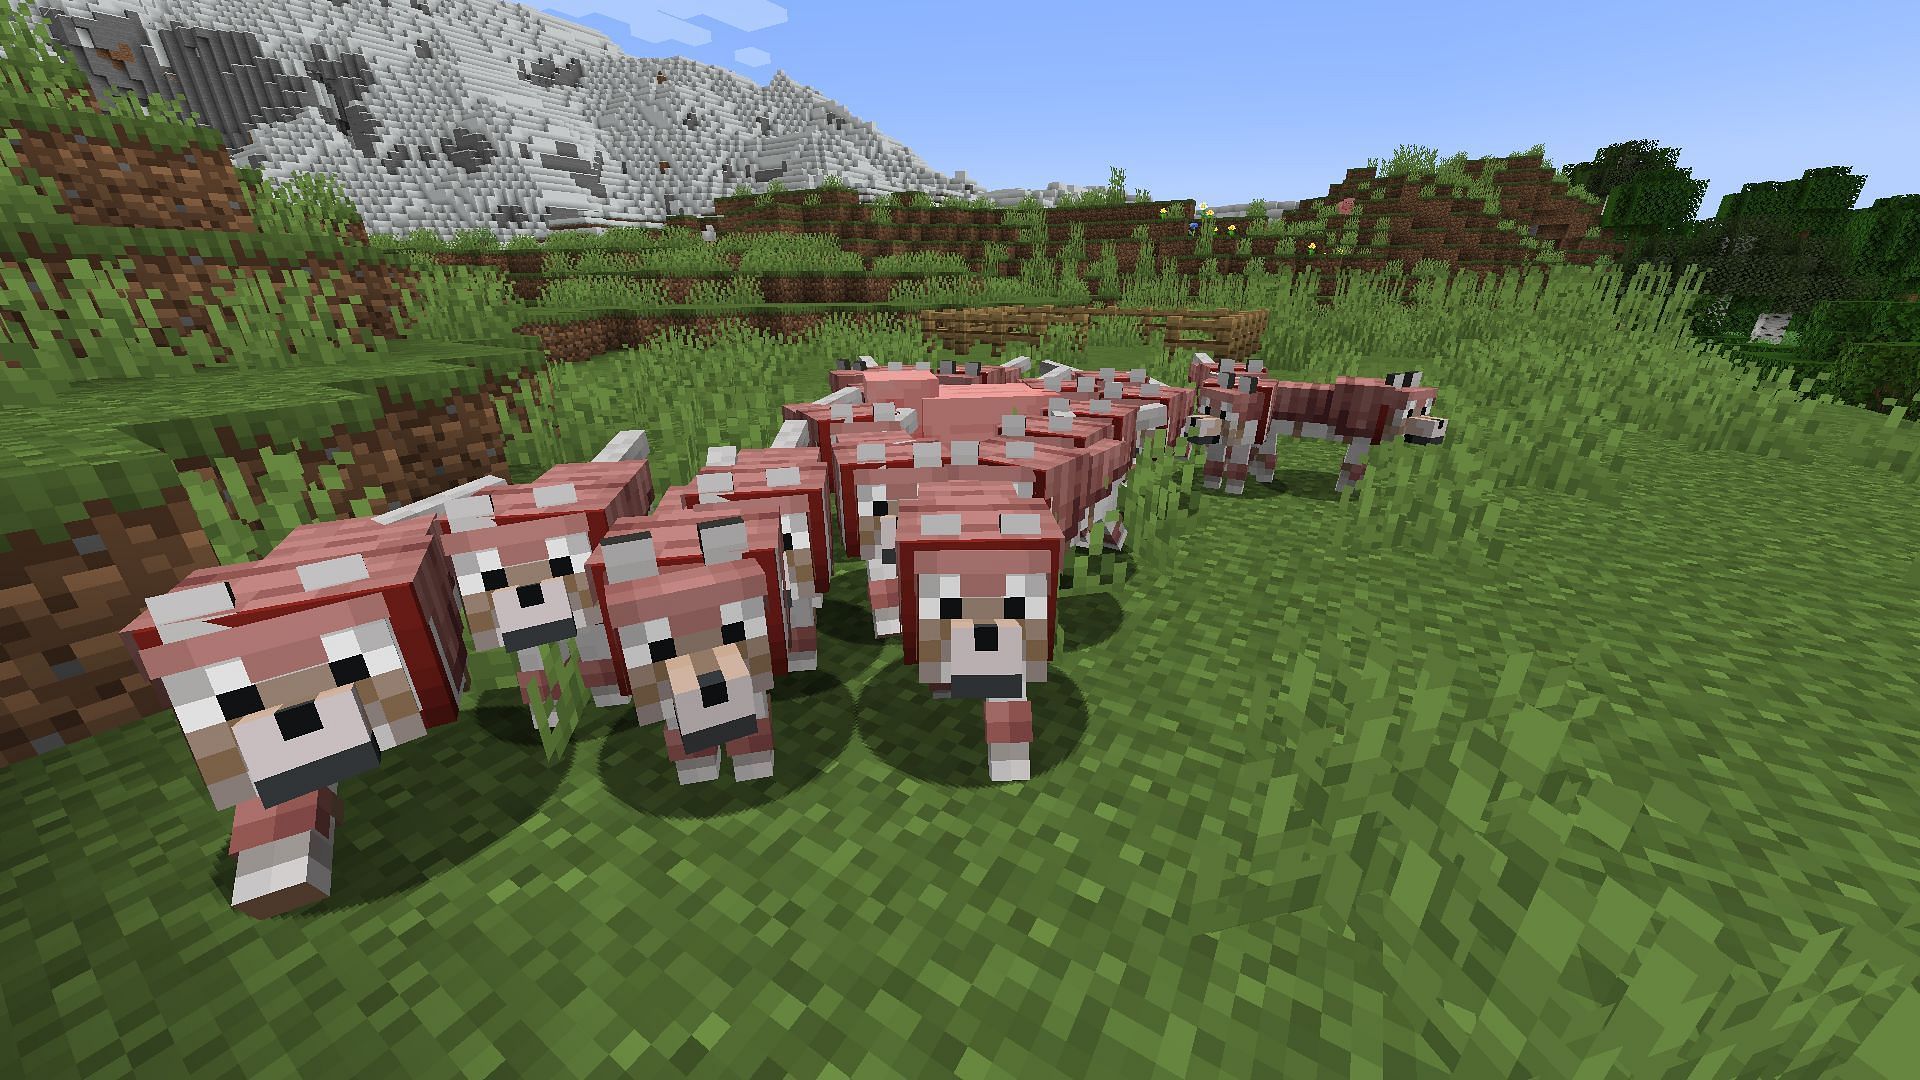 Minecraft wolf will received major feature updates (Image via Mojang Studios)